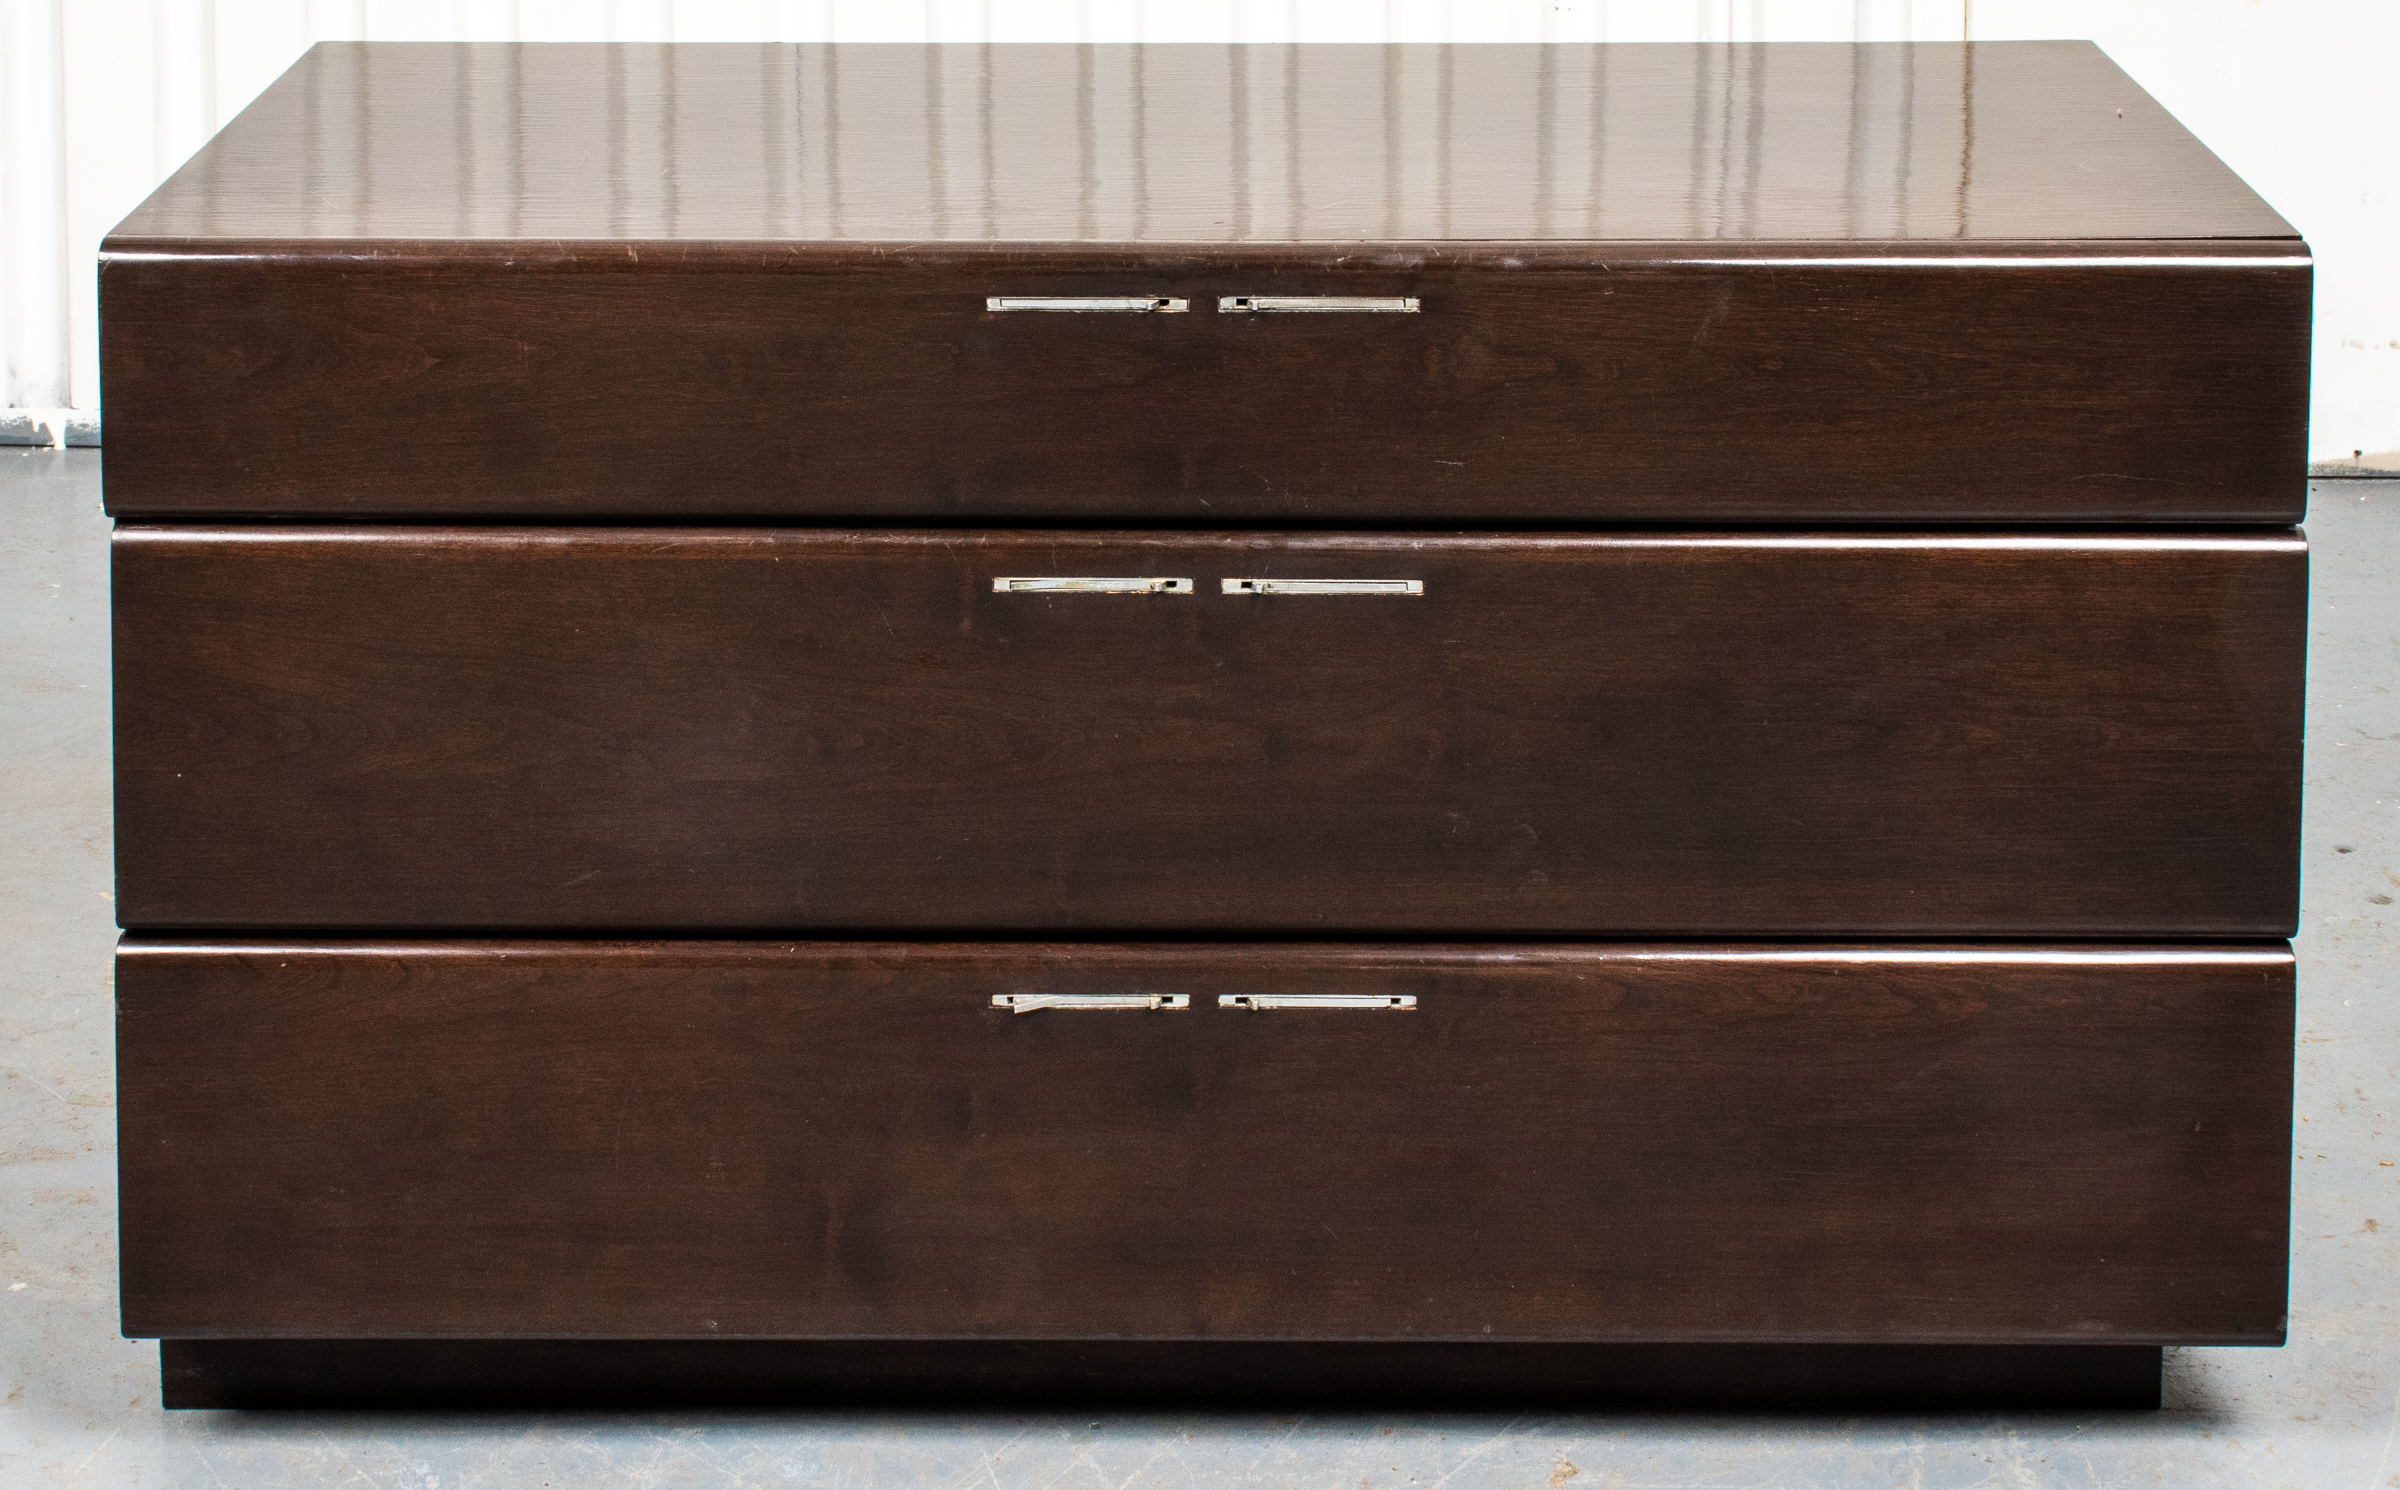 MID-CENTURY MODERN CHEST OF DRAWERS